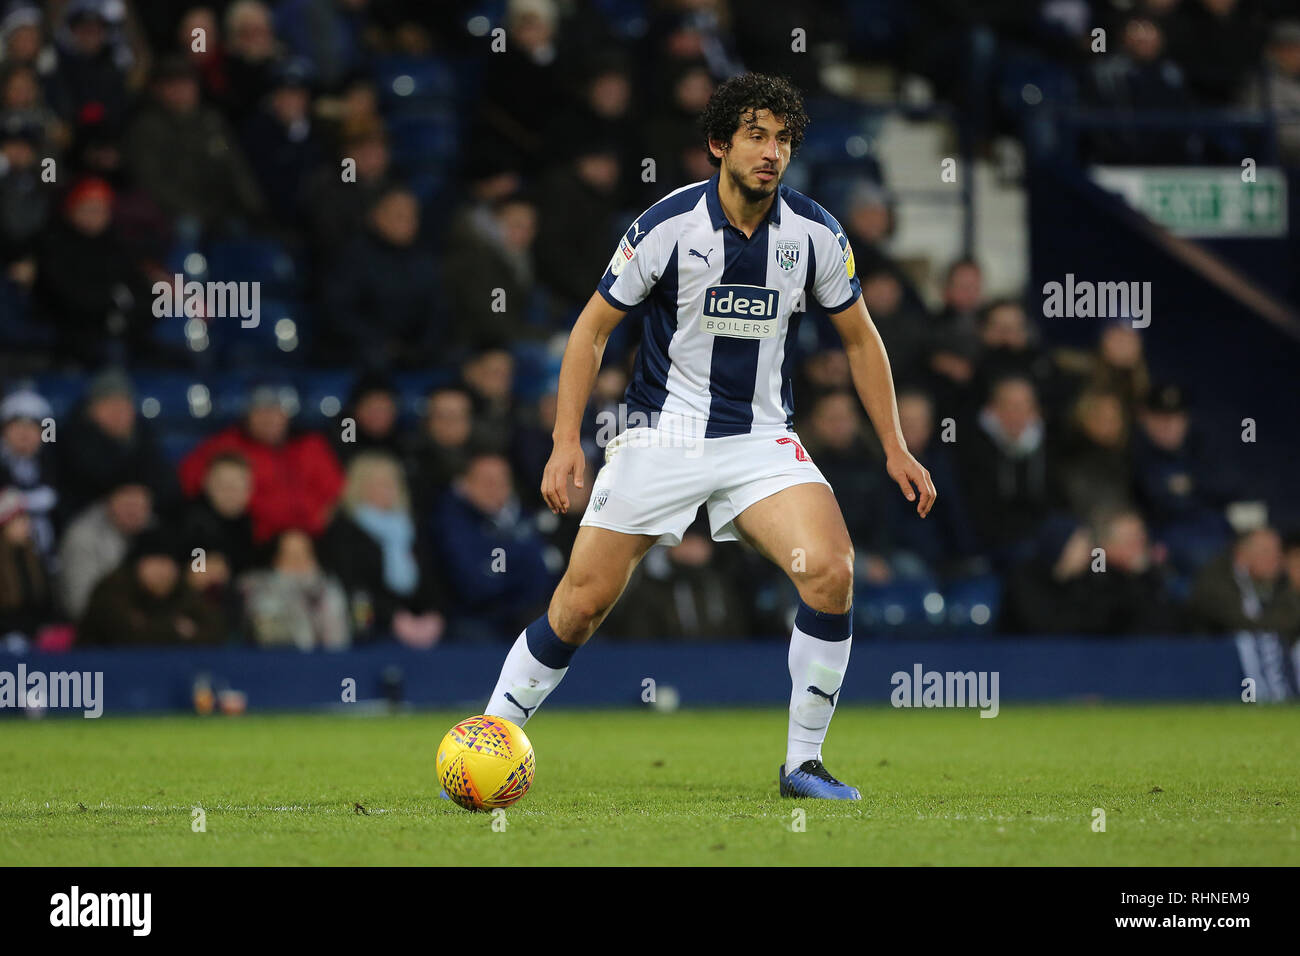 West Bromwich, UK. 2 February 2019.  Ahmed Hegazy of West Bromwich Albion during the Sky Bet Championship match between West Bromwich Albion and Middlesbrough at The Hawthorns, West Bromwich on Saturday 2nd February 2019.  (MI News | Alamy) Credit: MI News & Sport /Alamy Live News Stock Photo